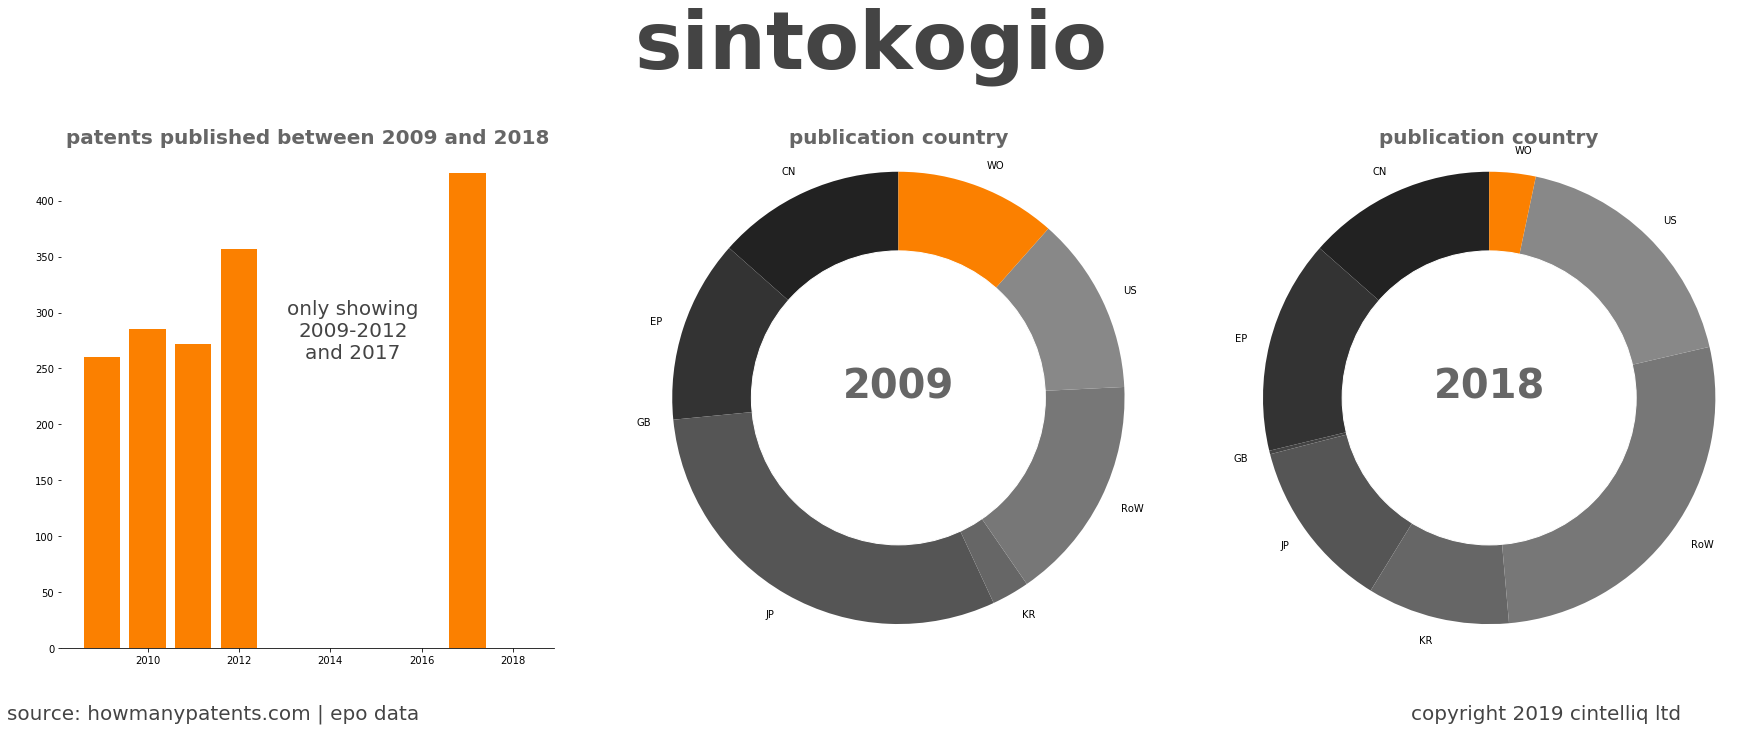 summary of patents for Sintokogio